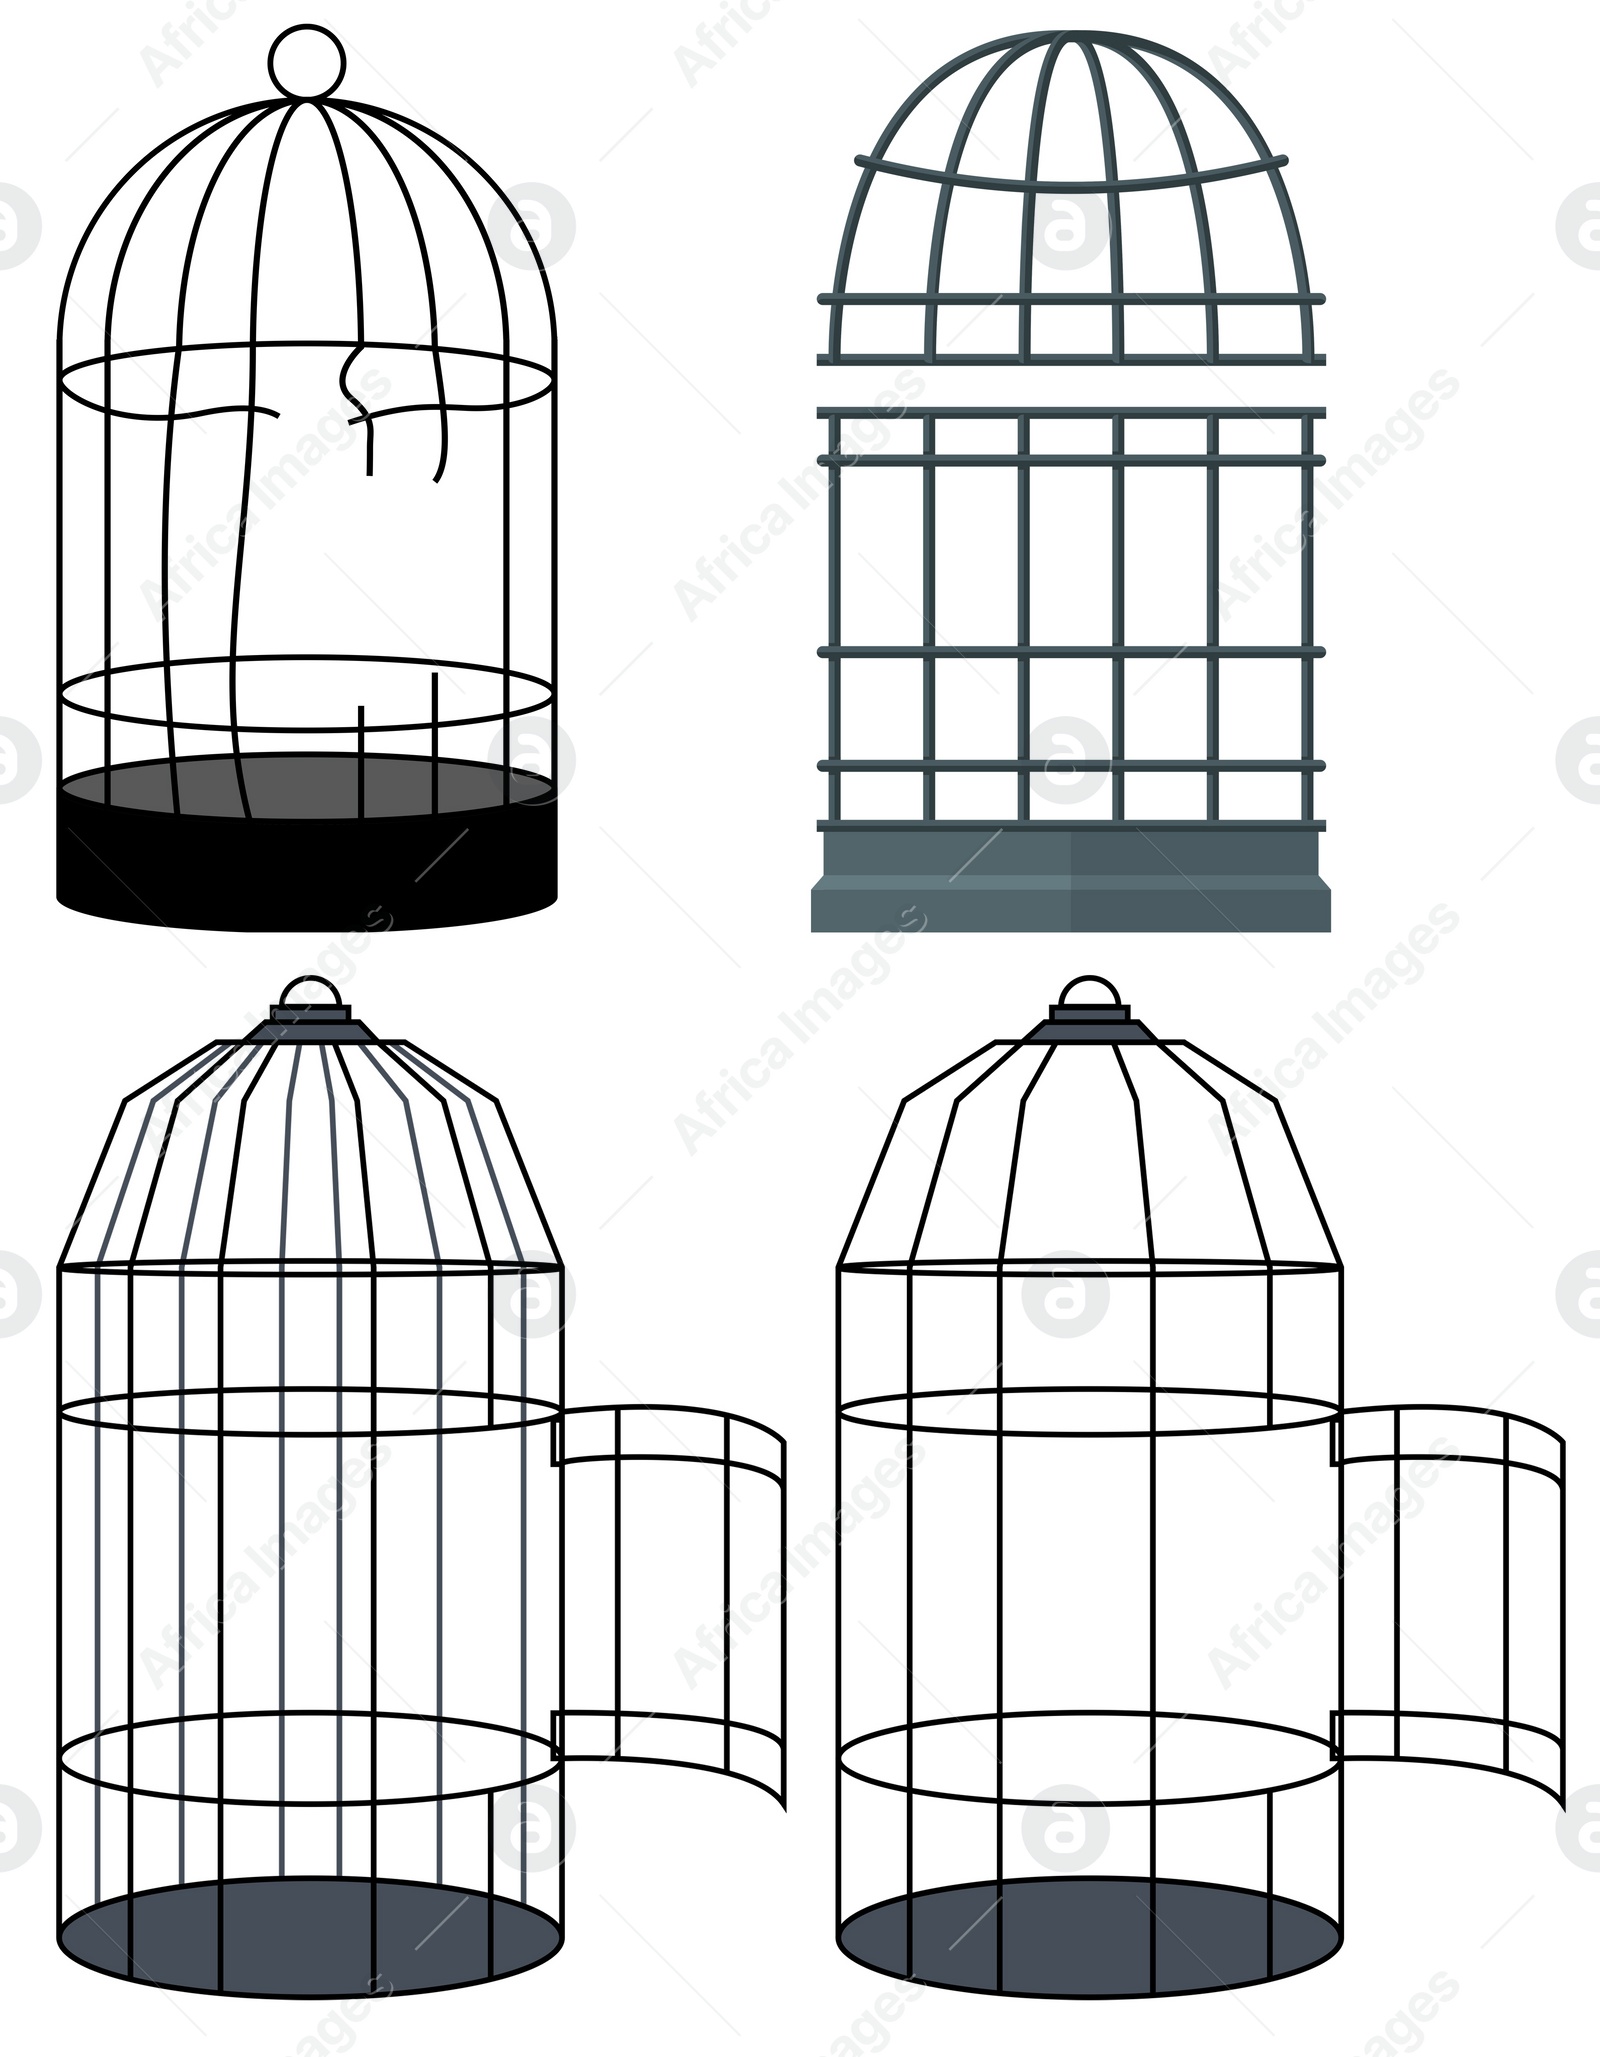 Illustration of Collage of different broken and open cages on white background